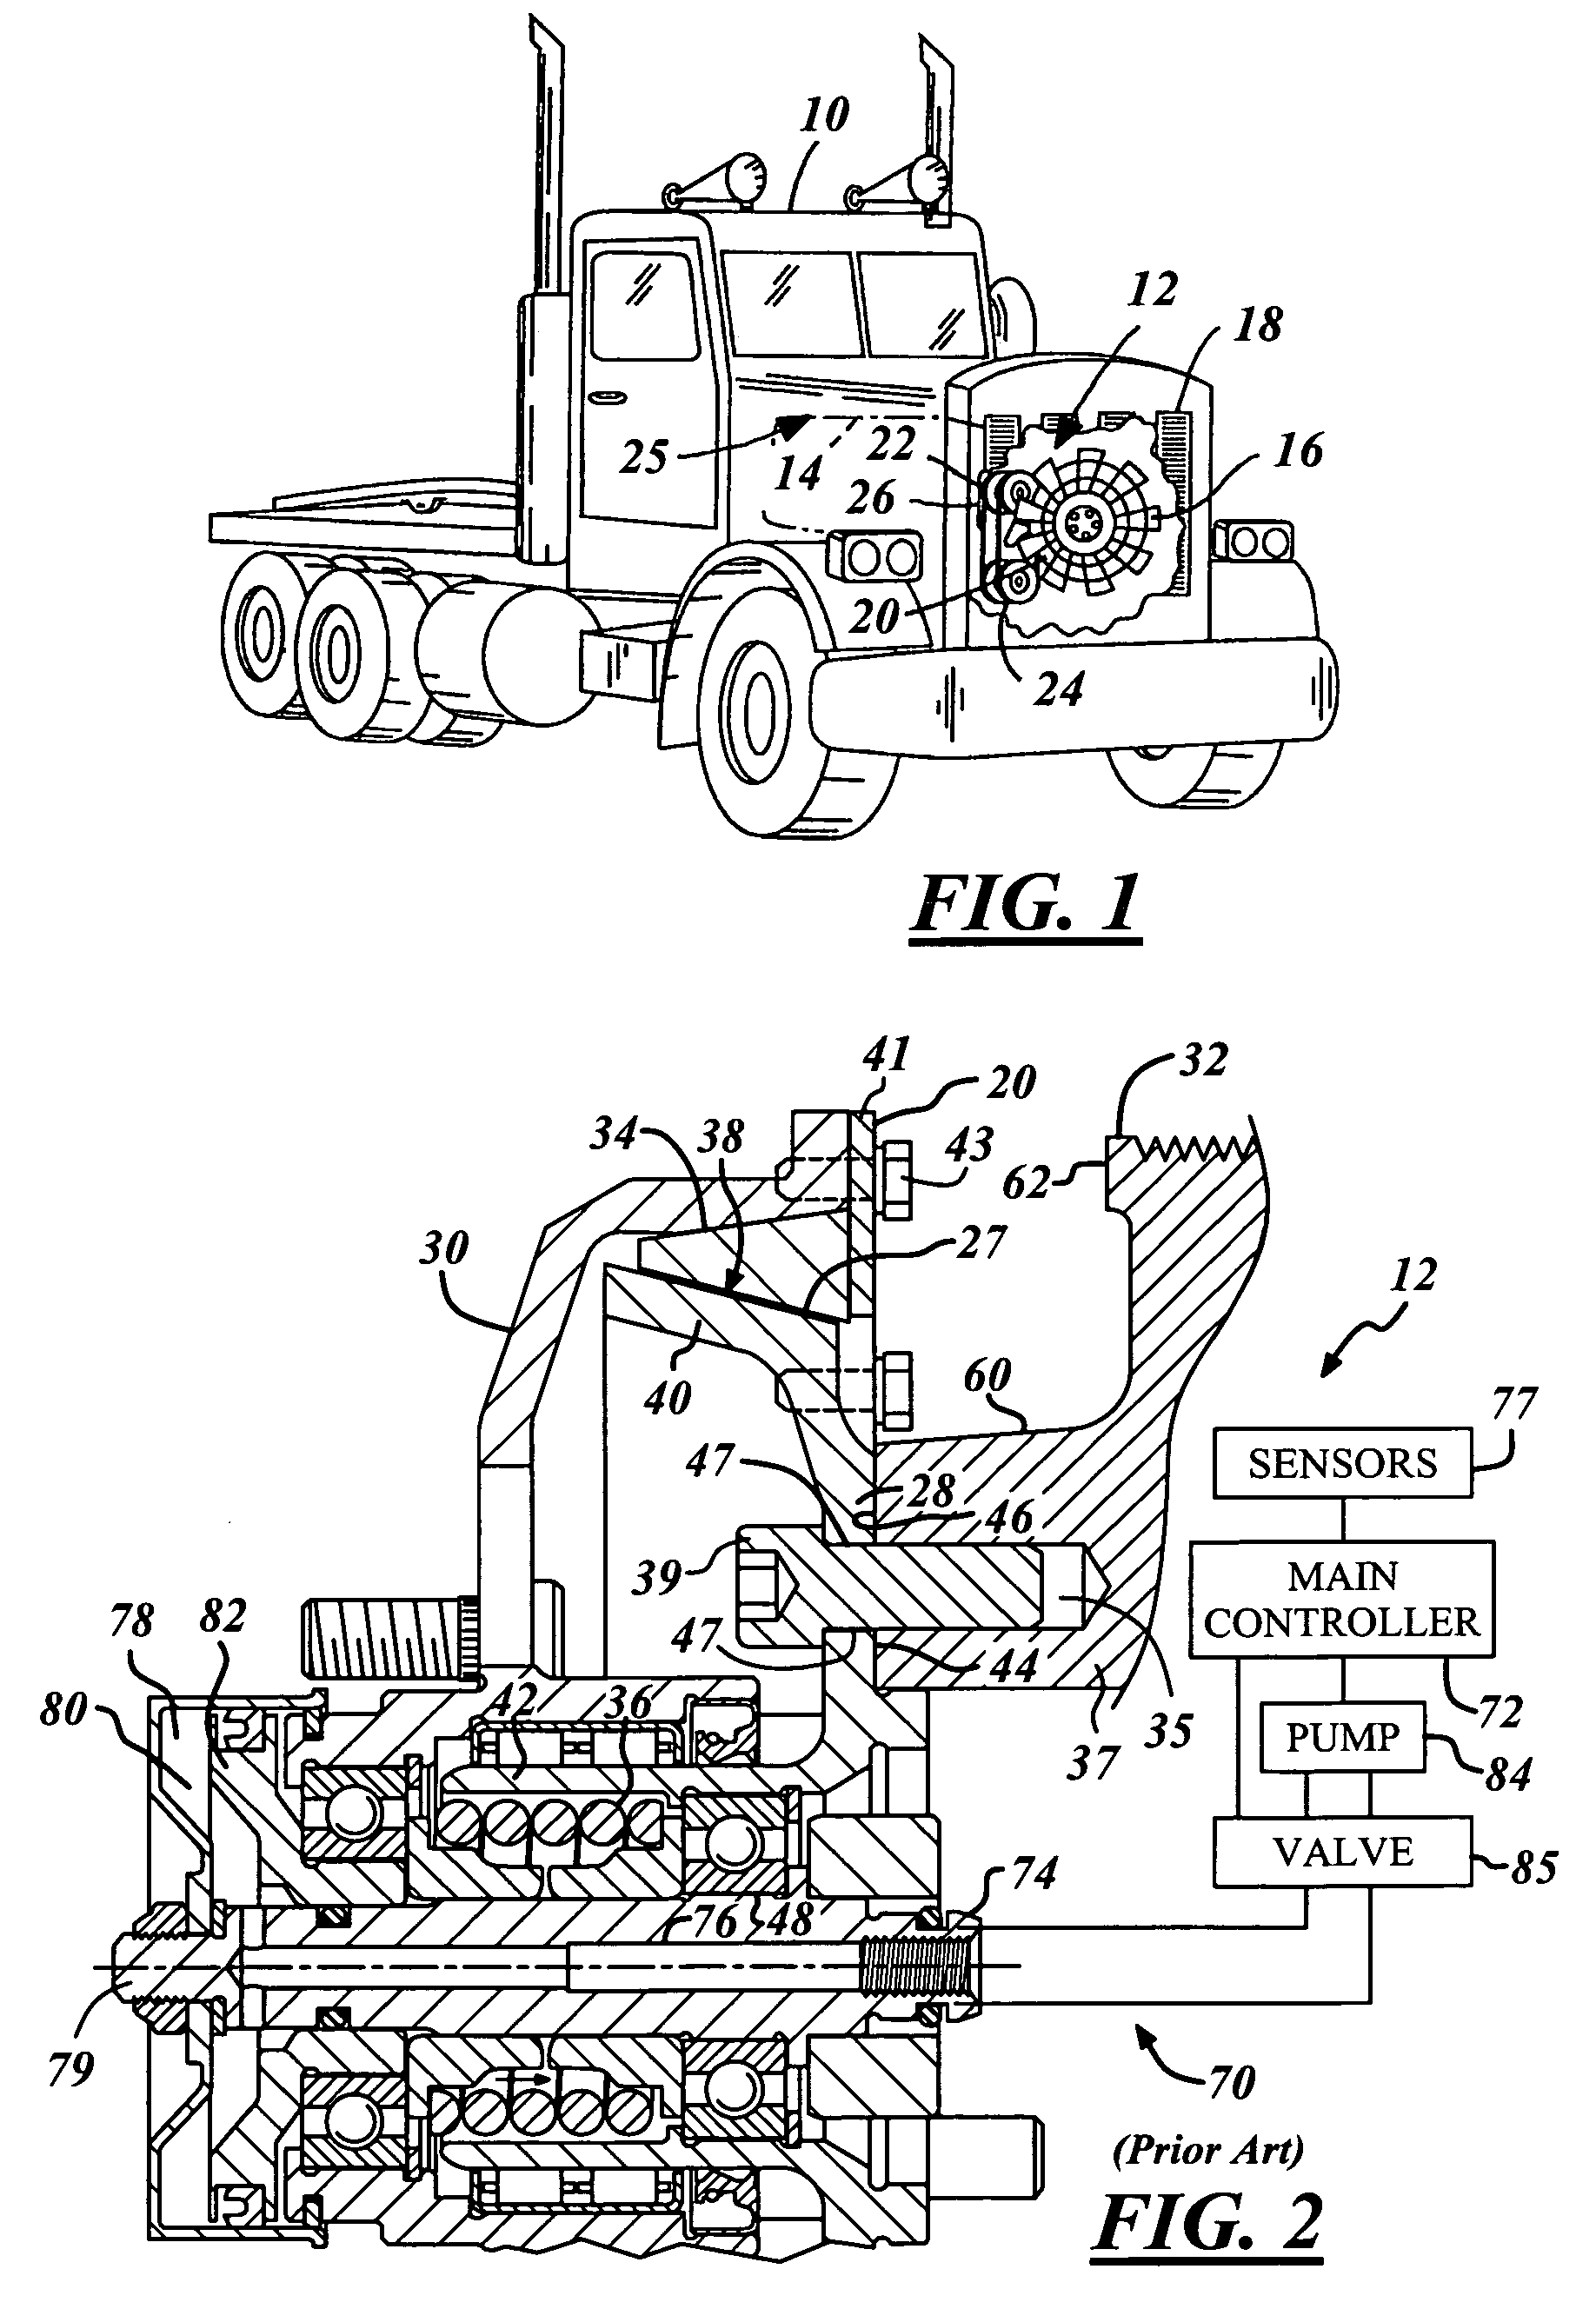 Pneumatic cone clutch fan drive having threaded attachment method for drive shaft of clutch to hub mounting